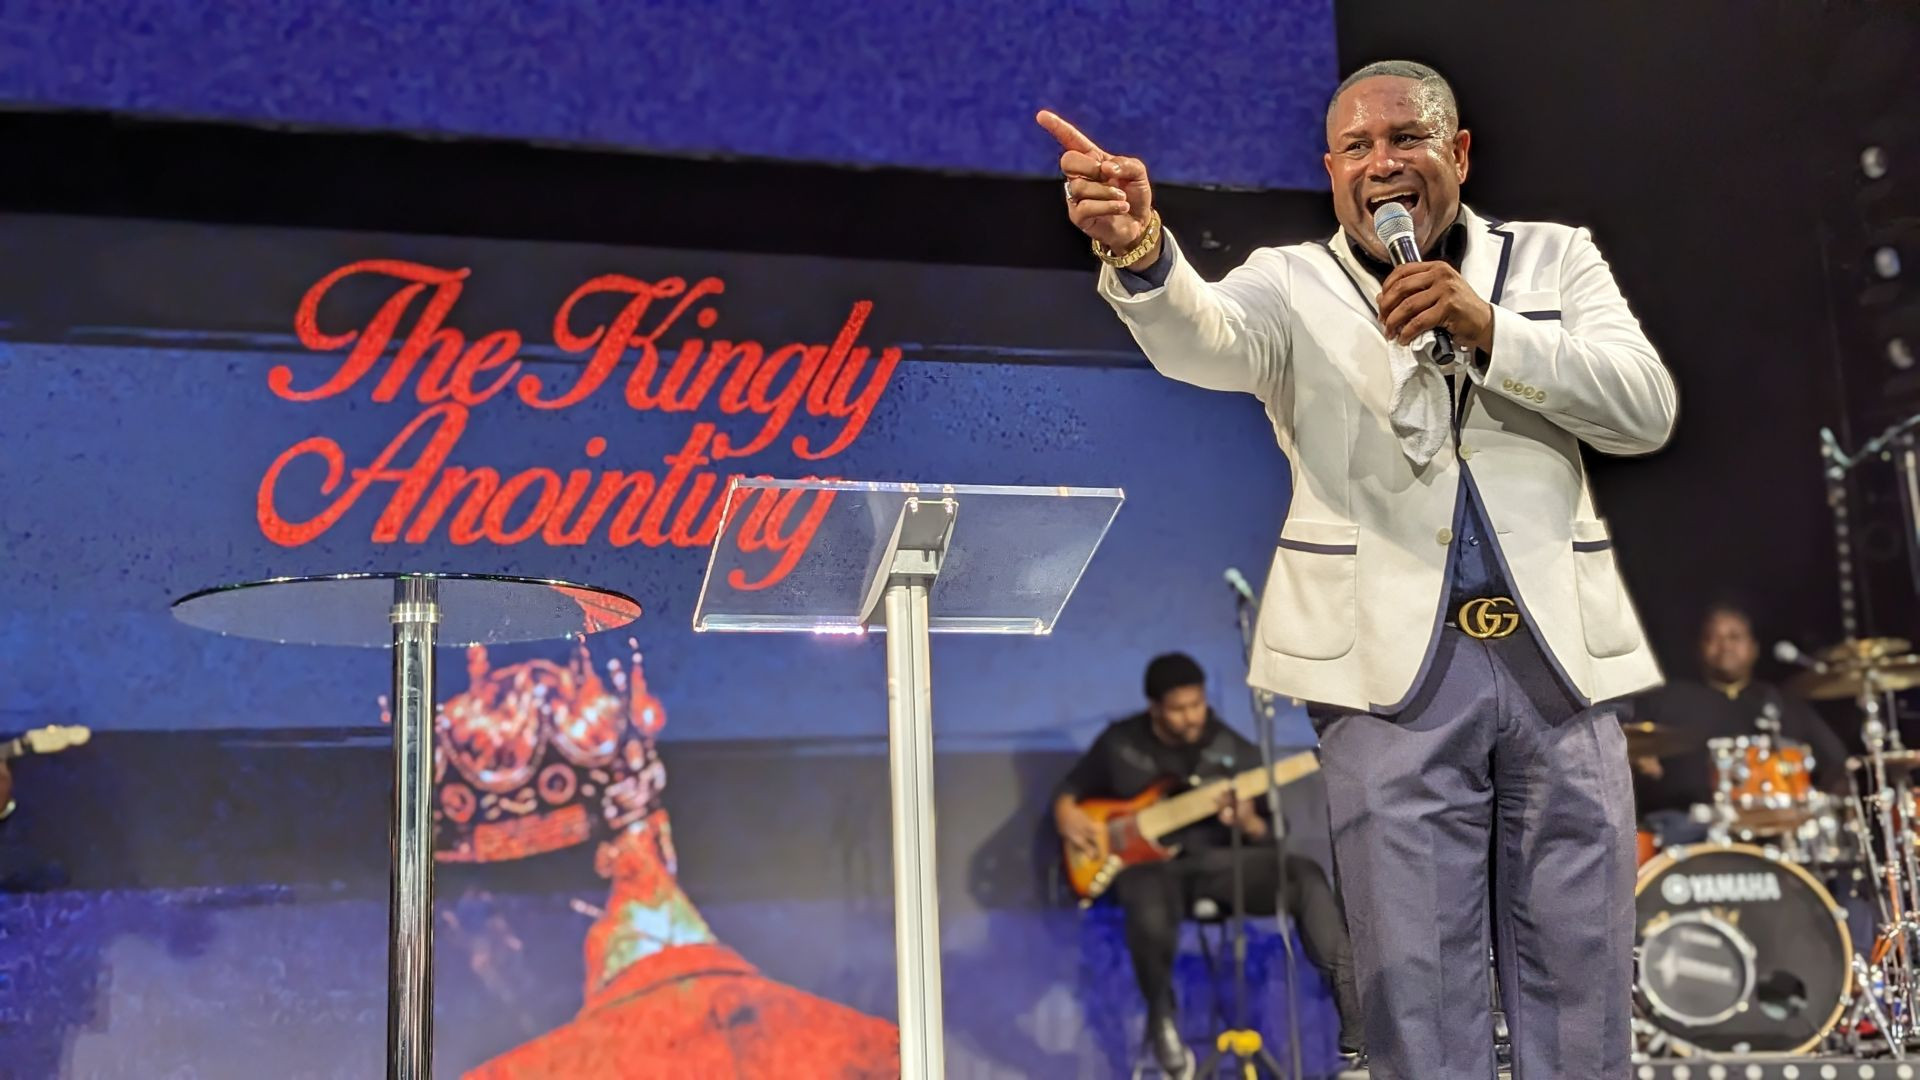 THE KINGLY ANOINTING PROPHETIC SERVICE APOSTLE OMAR MORTON AT PROPHET LOVY'S REVELATION CHURCH